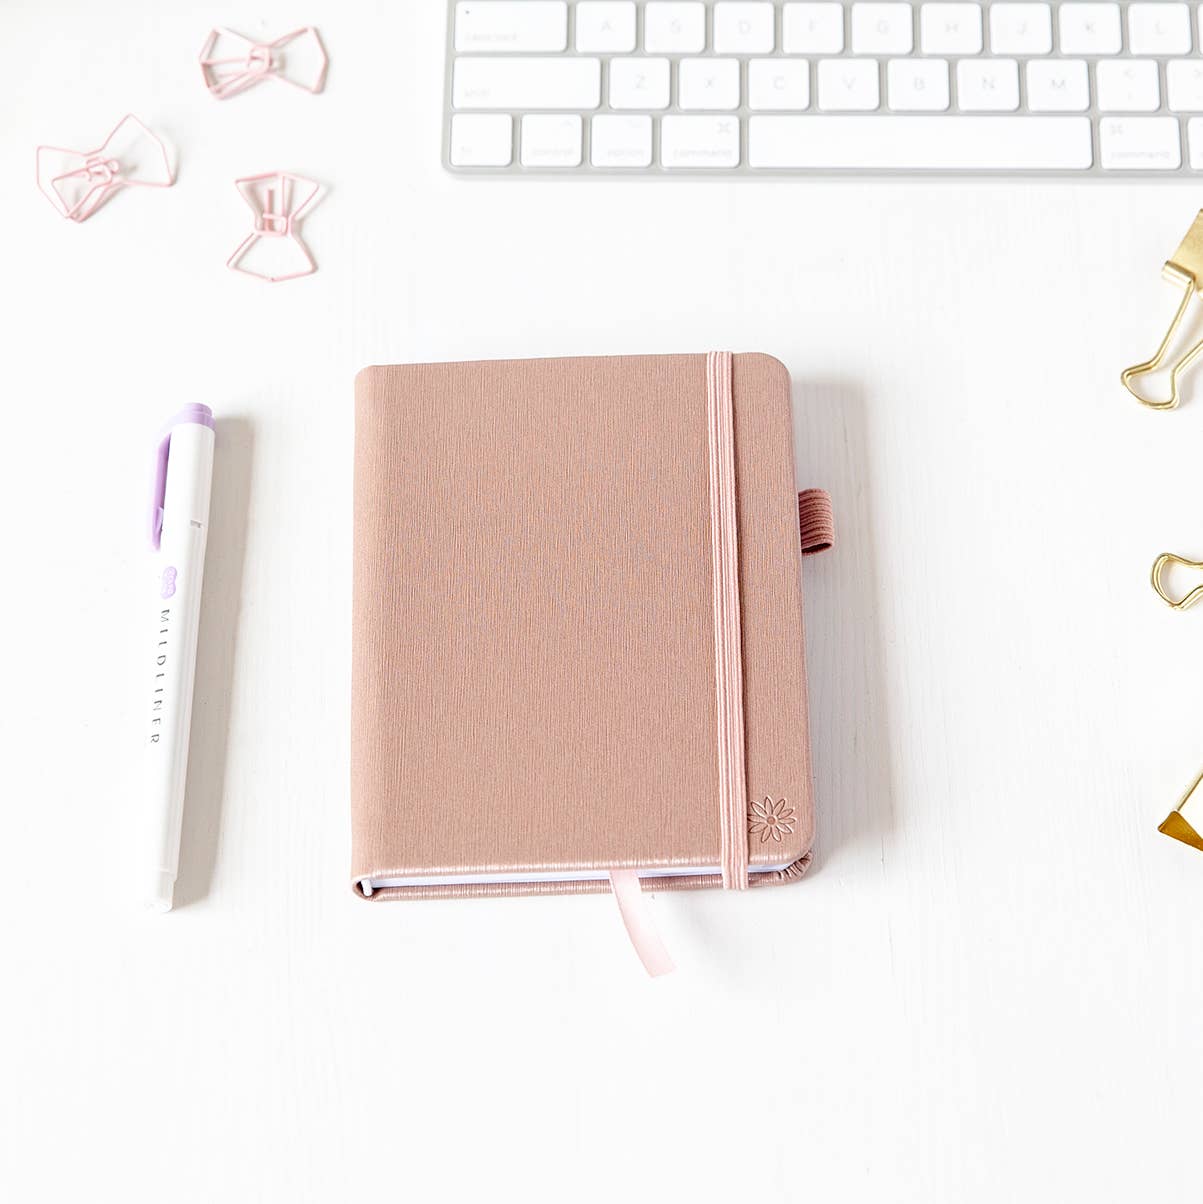 Rose Gold Password Logbook Core bloom daily planners